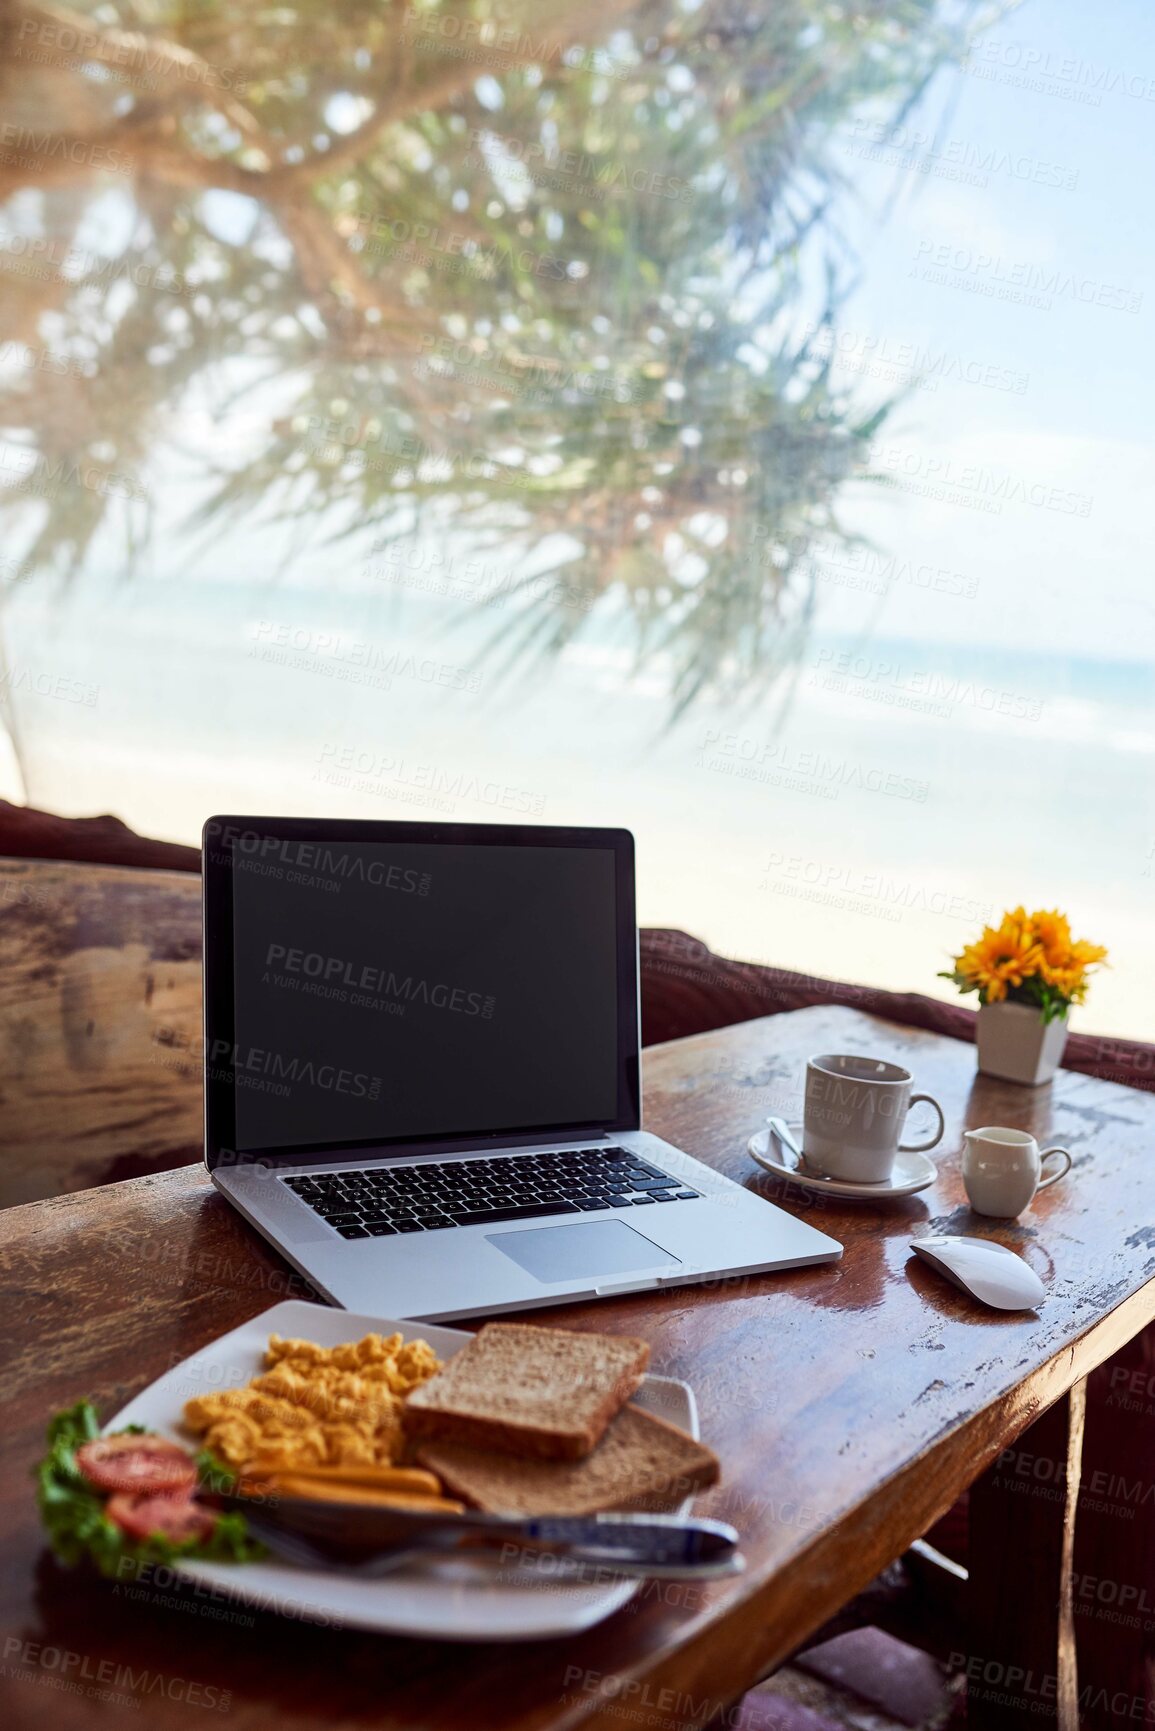 Buy stock photo Shot of a laptop and freshly made breakfast on a table with a view of the beach in the background